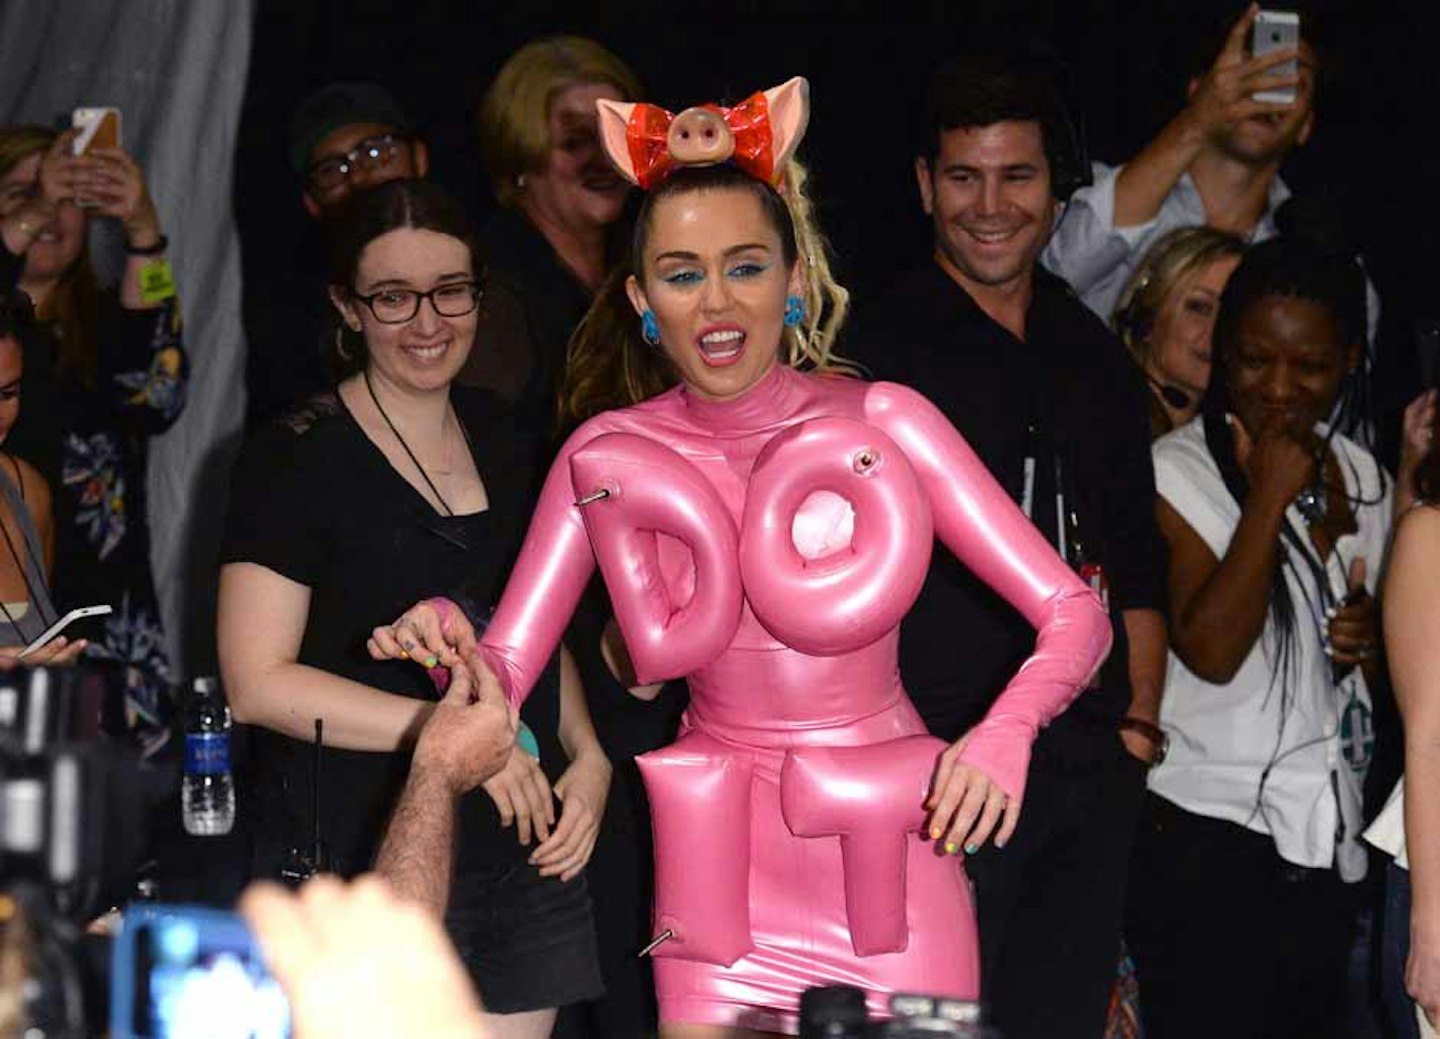 Miley Cyrus backstage at the MTV Video Music Awards (2015)